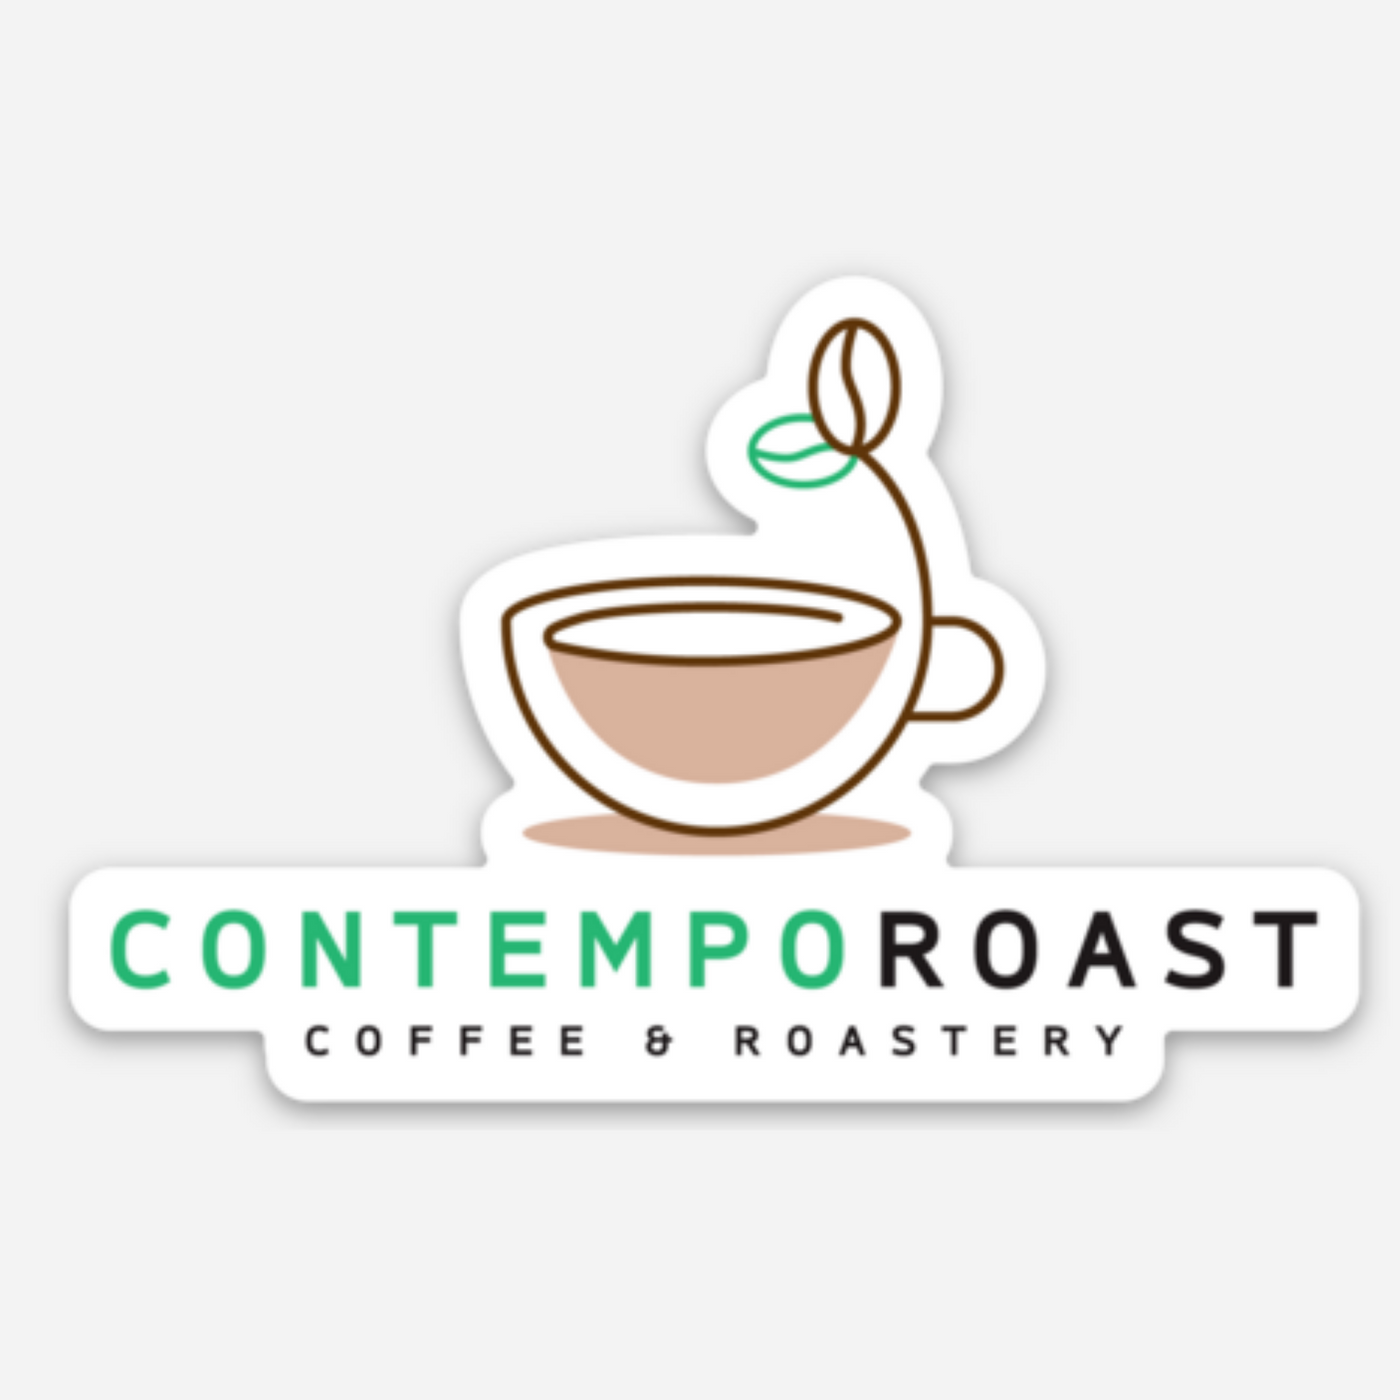 ContempoRoast die-cut vinyl sticker showing the ContempoRoast coffee cup with the stylized coffee beans (one unroasted green, one roasted brown) curving up the side of the cup, with the words ContempoRoast Coffee & Roastery under the logo